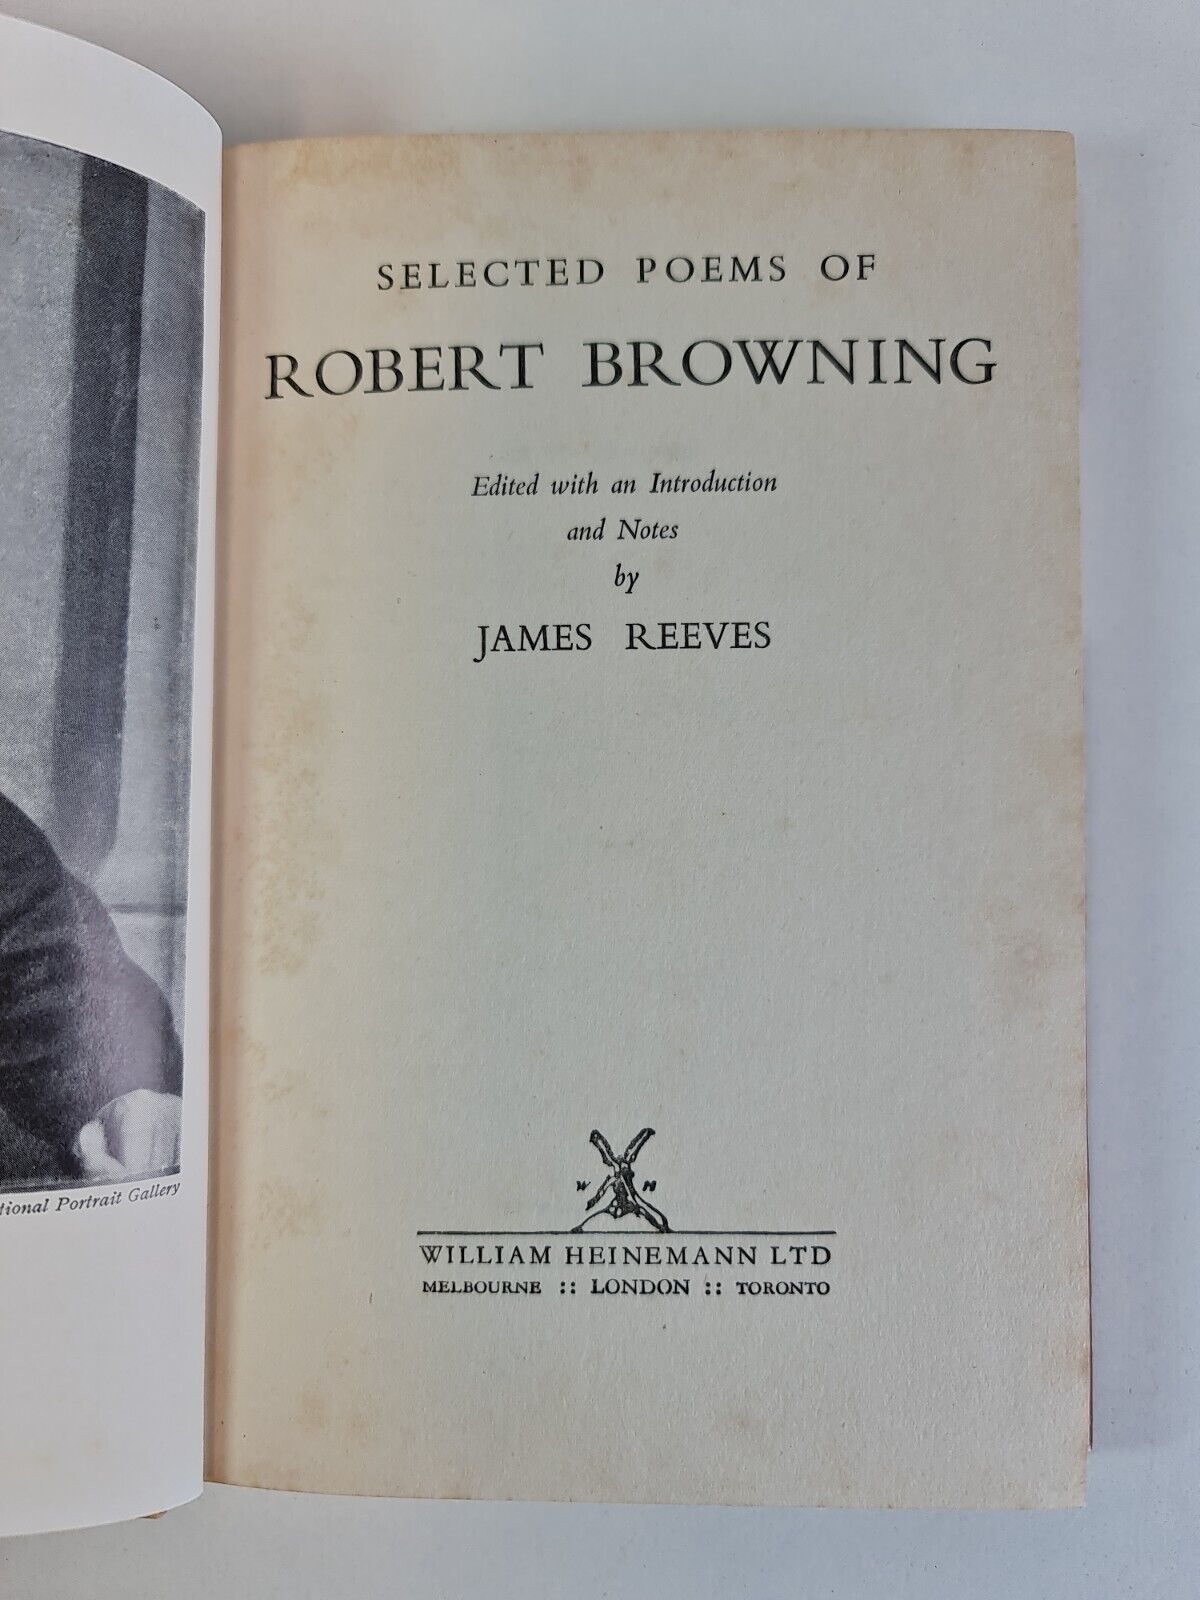 Selected Poems of Robert Browning by James Reeves (1955)